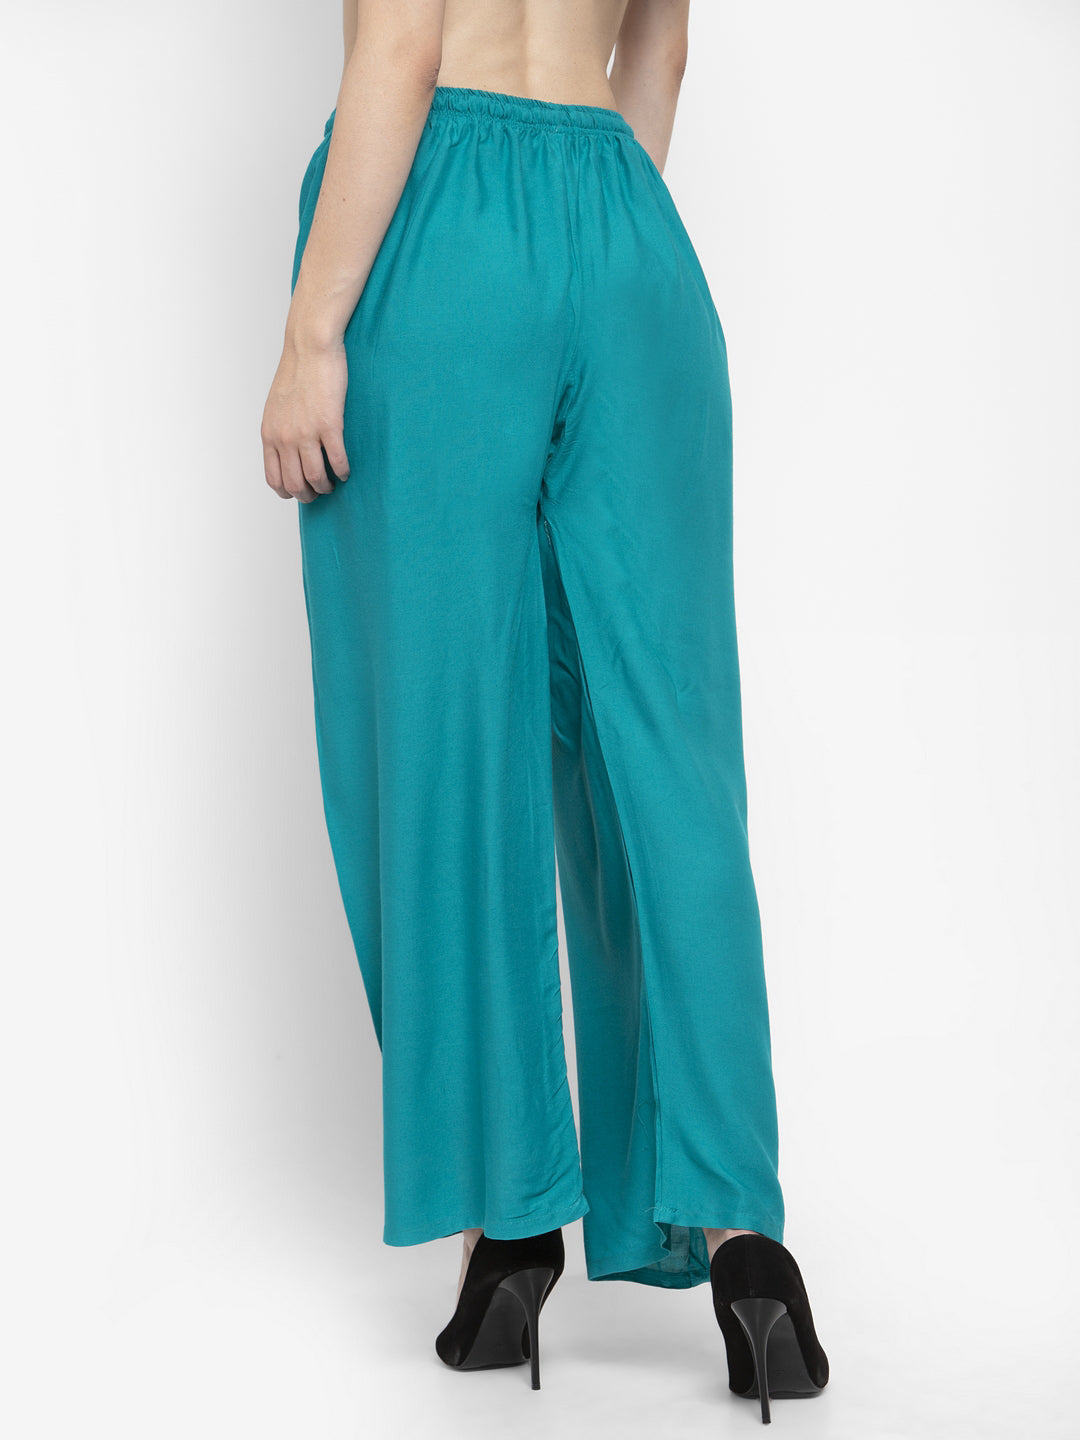 Women's Solid Turquoise & Navy Blue Rayon Palazzo (Pack Of 2) - Wahe-NOOR